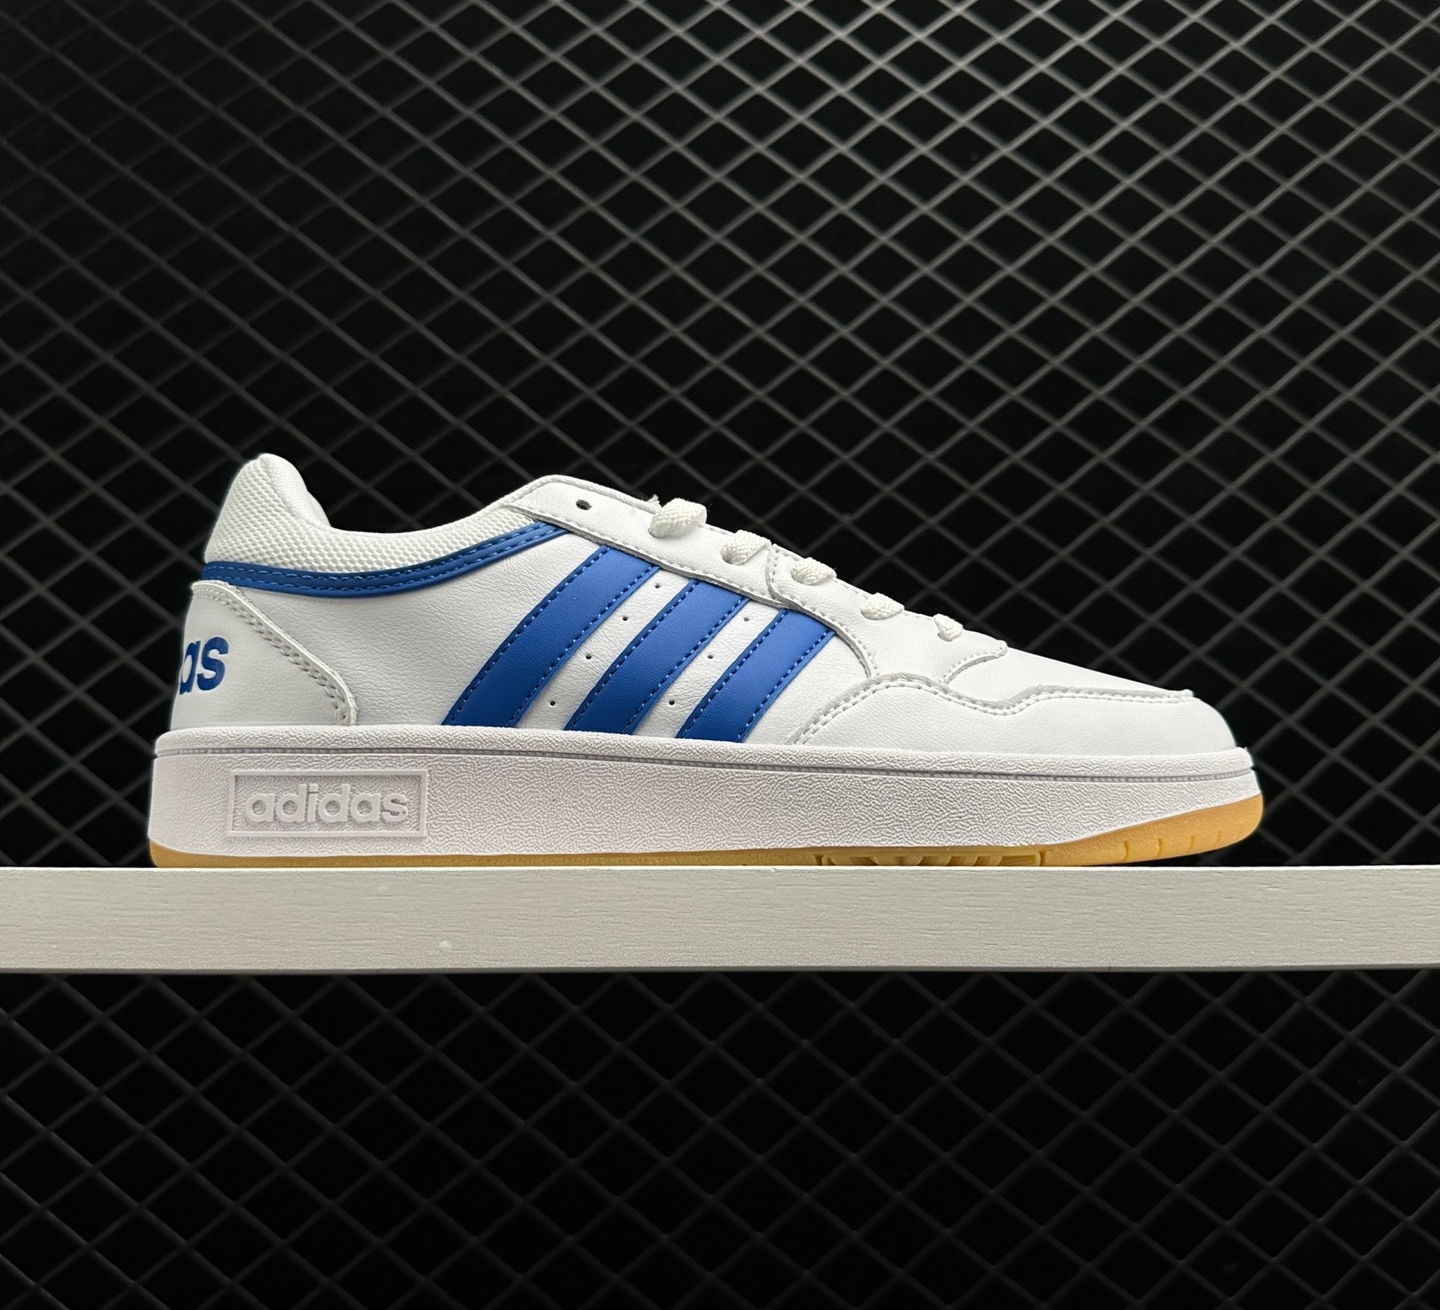 Adidas Hoops 3.0 Low Classic Vintage Shoes White Royal Blue - GY5435